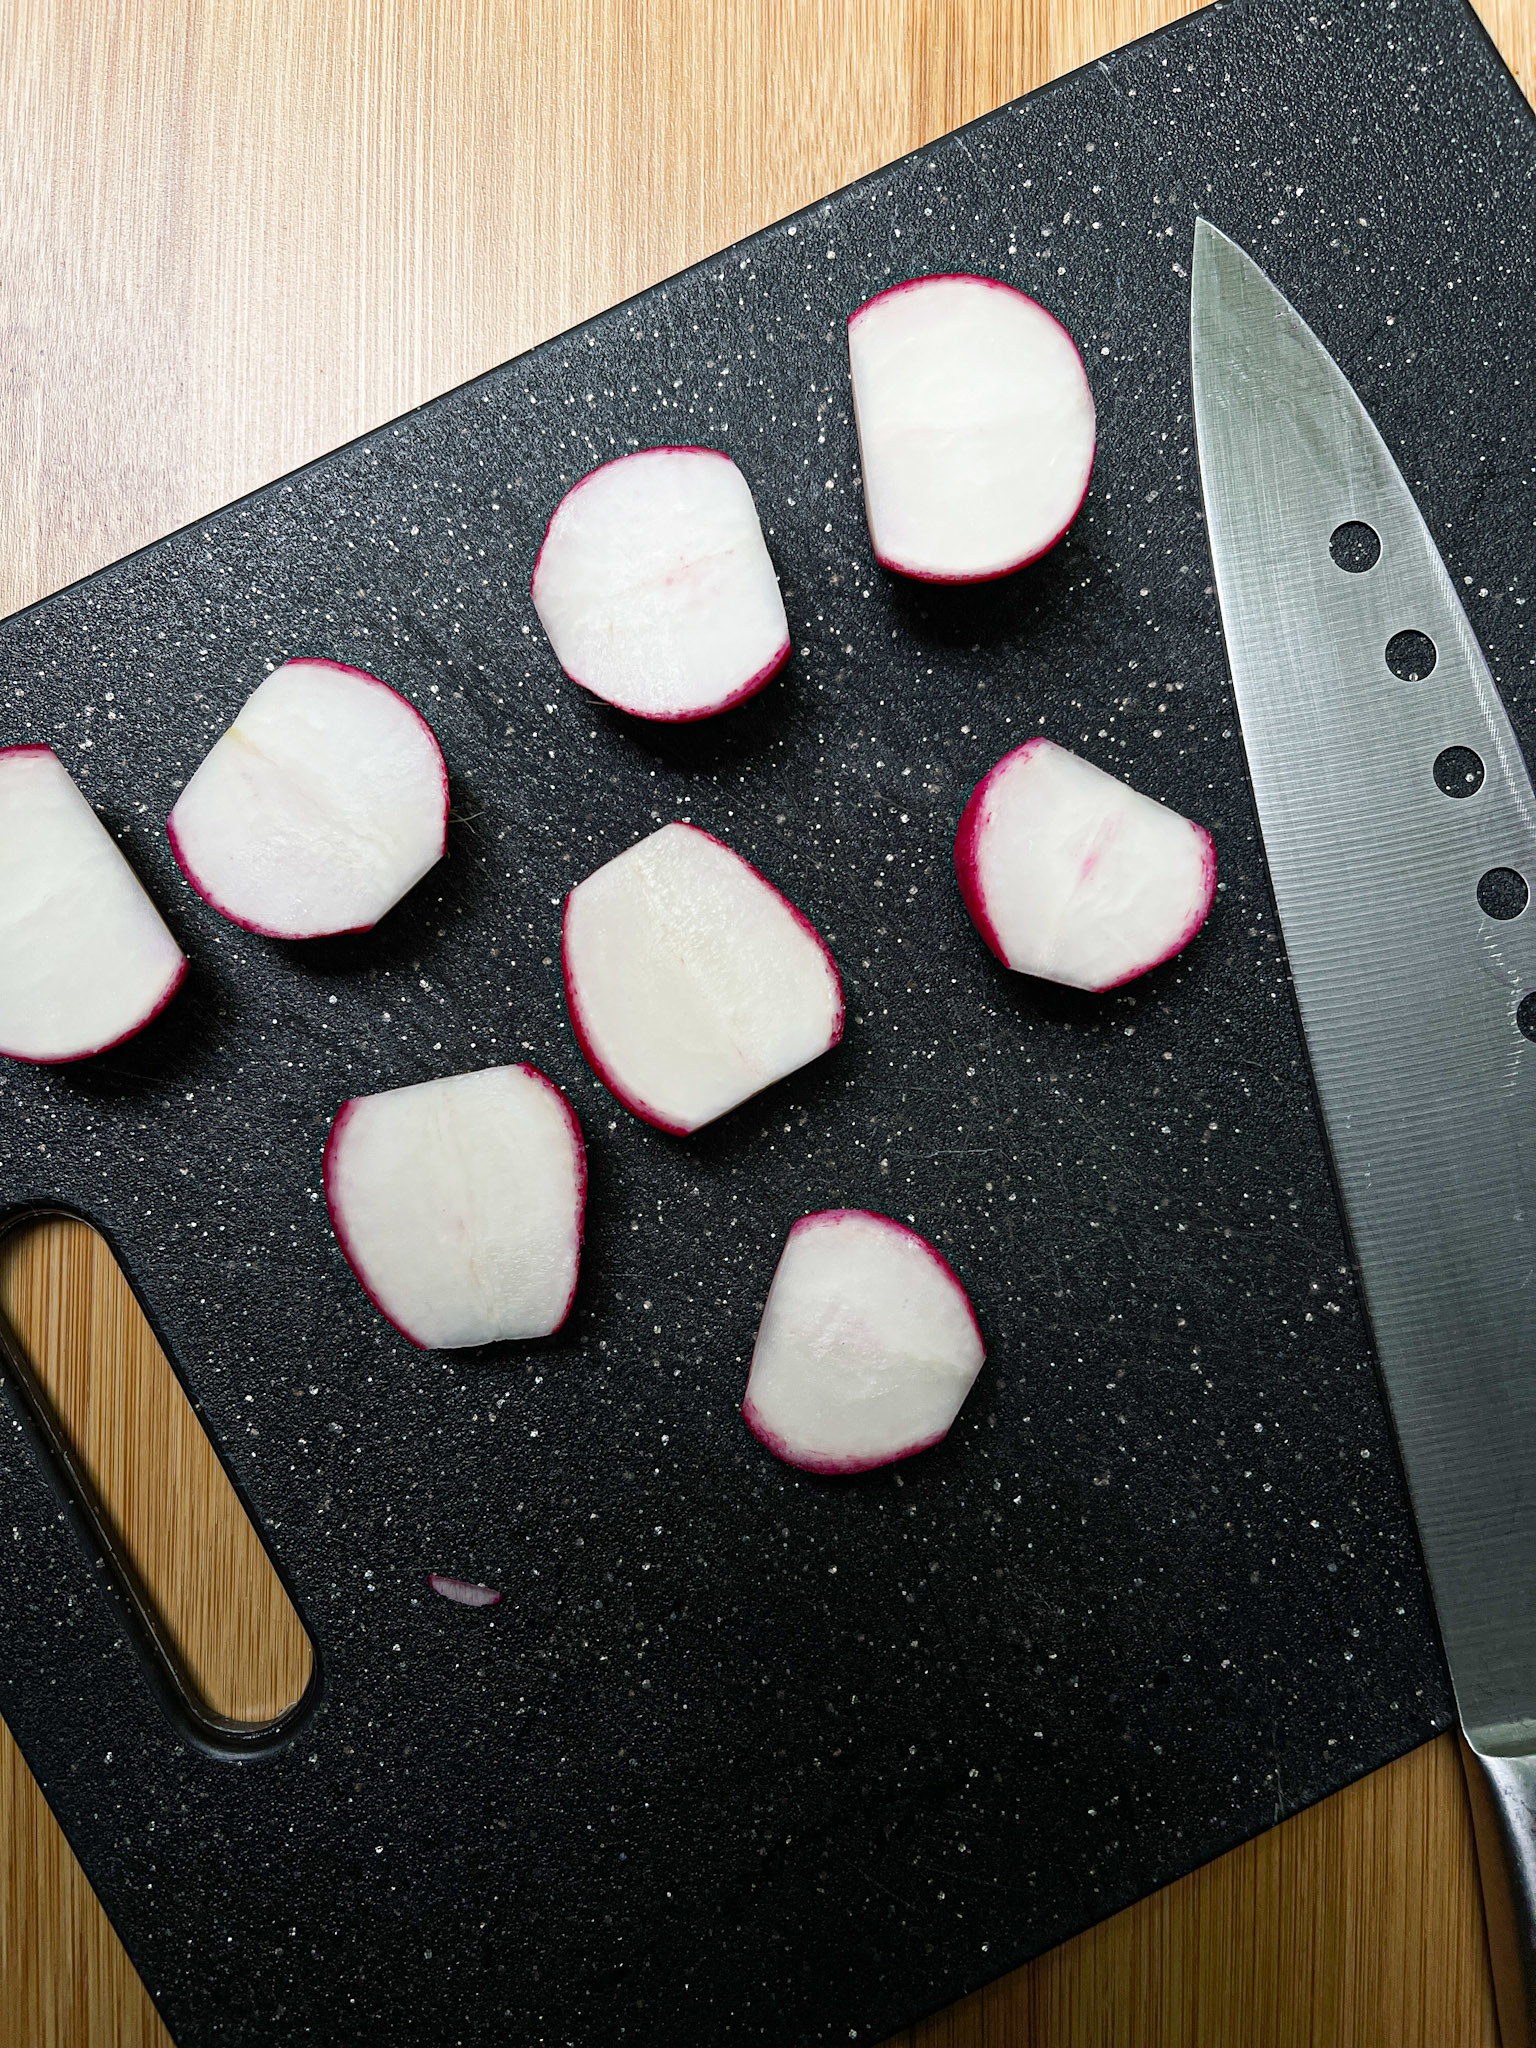 Halved radishes on a cutting board